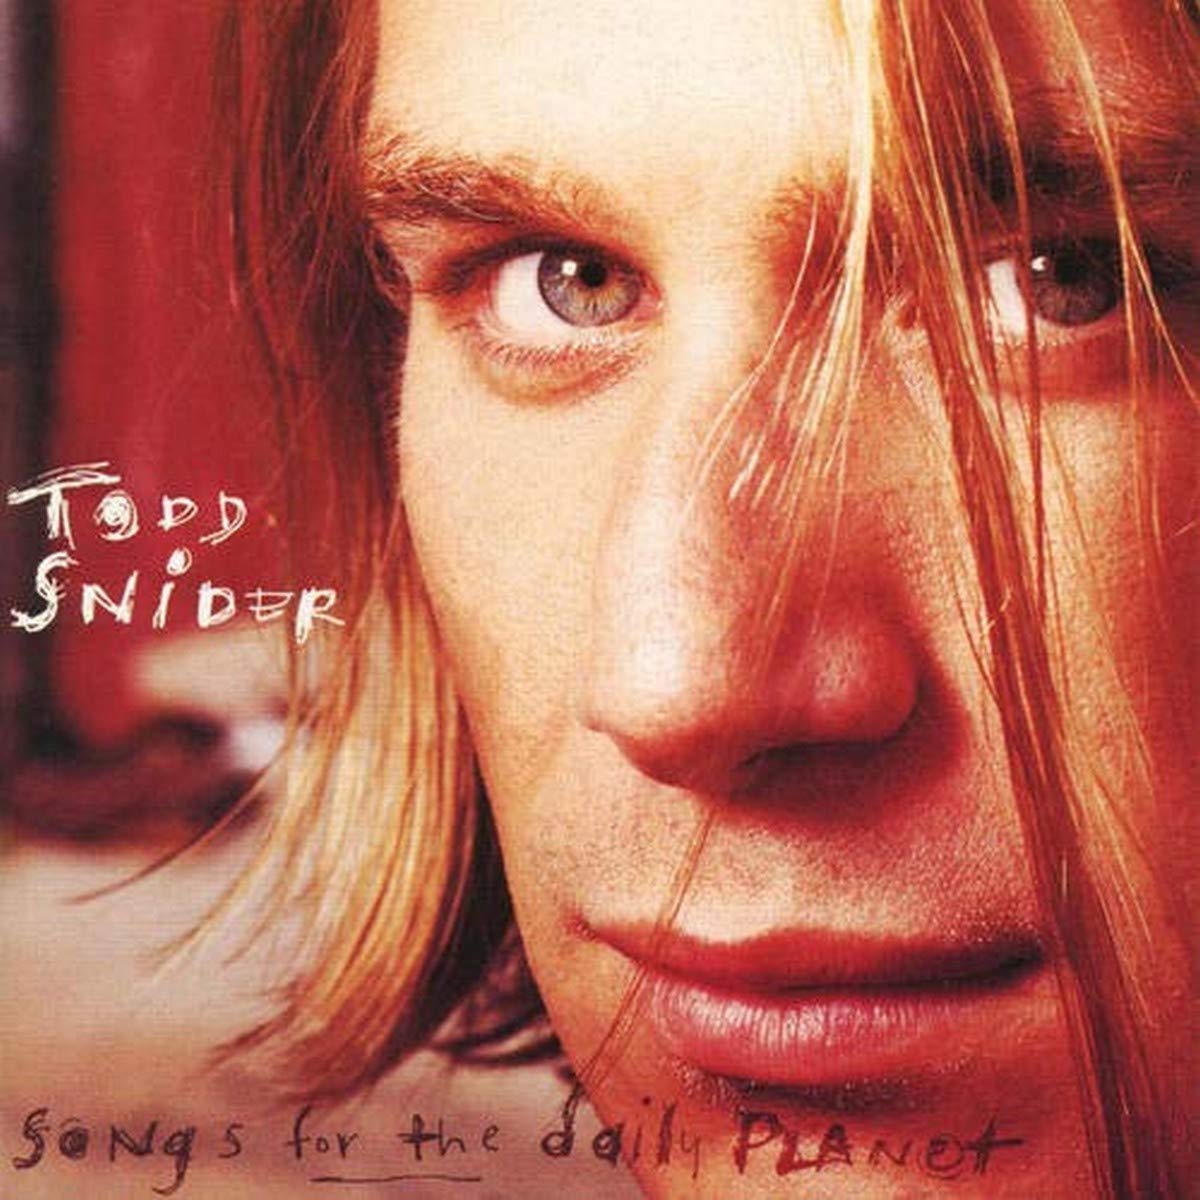 album cover for todd snider's songs for the daily planet